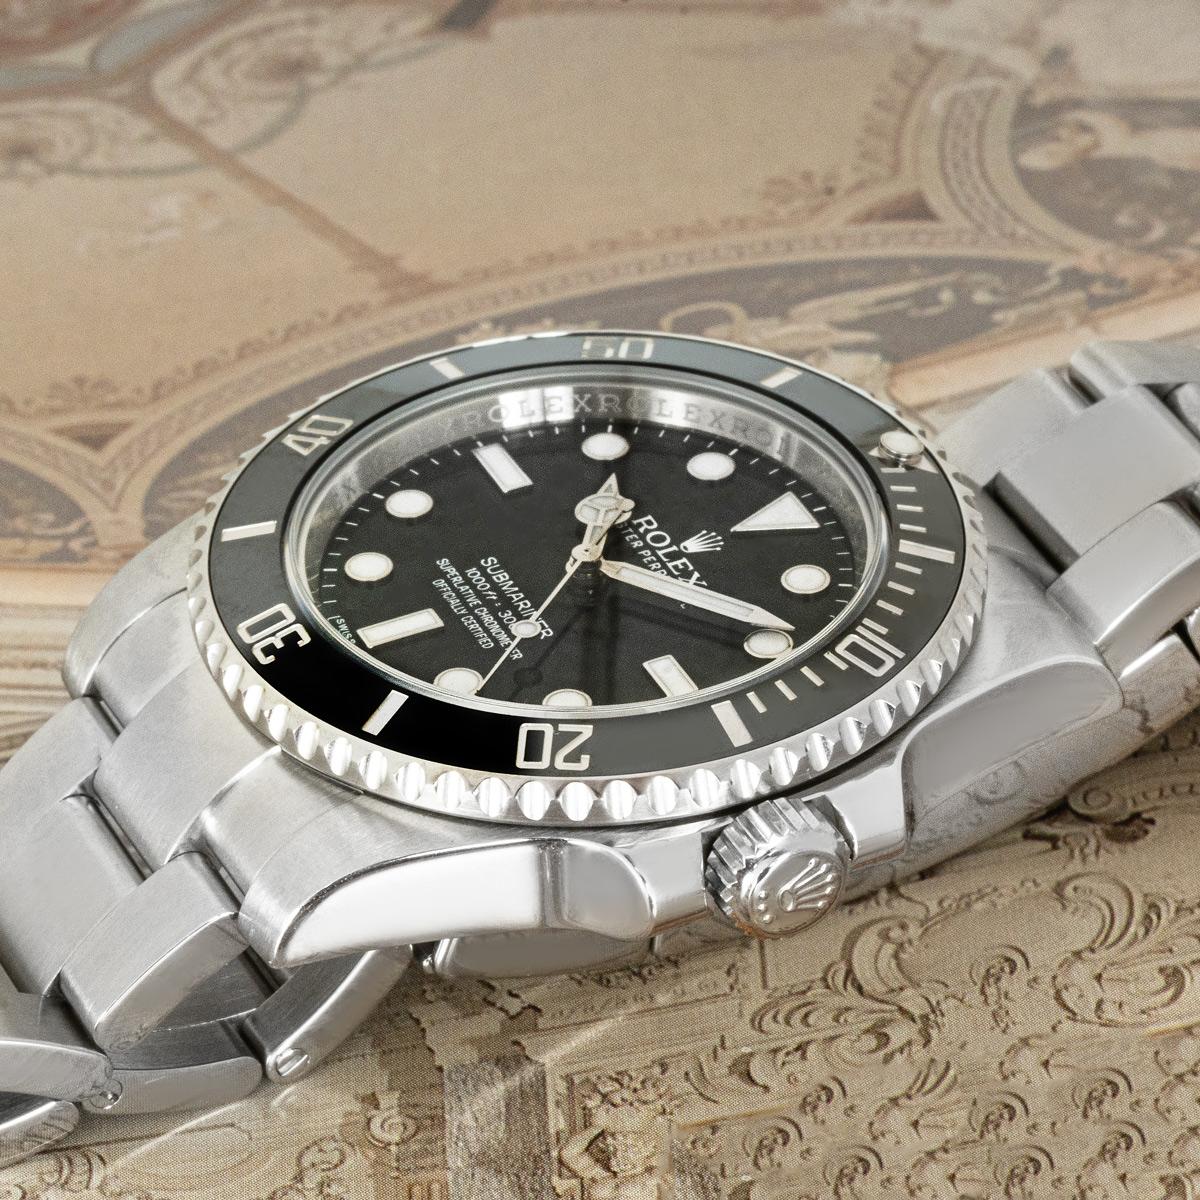 A 40mm Submariner Non-Date by Rolex in stainless steel. Features a black dial complemented by a black ceramic unidirectional rotatable bezel with 60 minute graduations in platinum.

The Oyster bracelet comes with the Oysterlock folding clasp. Fitted